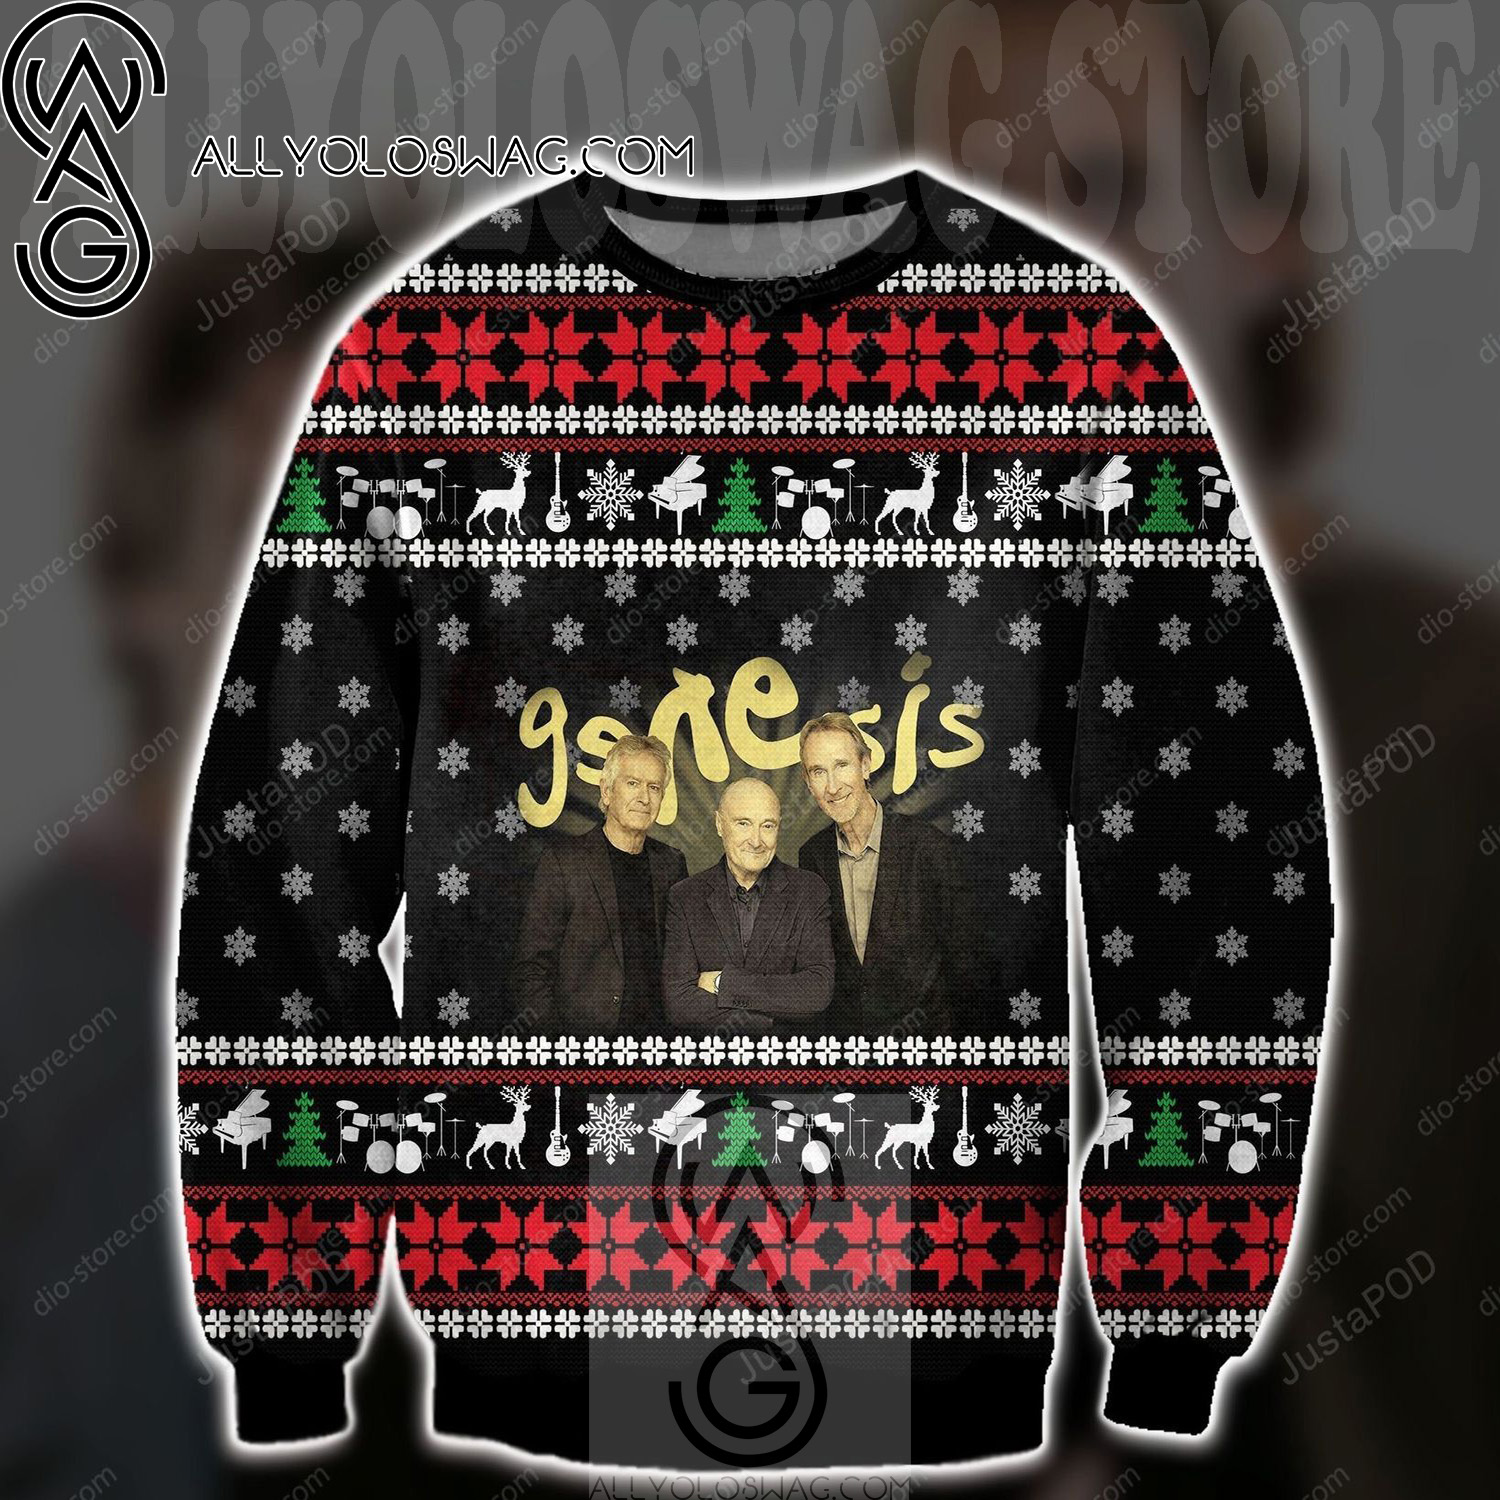 Genesis Holiday Party Ugly Christmas Sweater